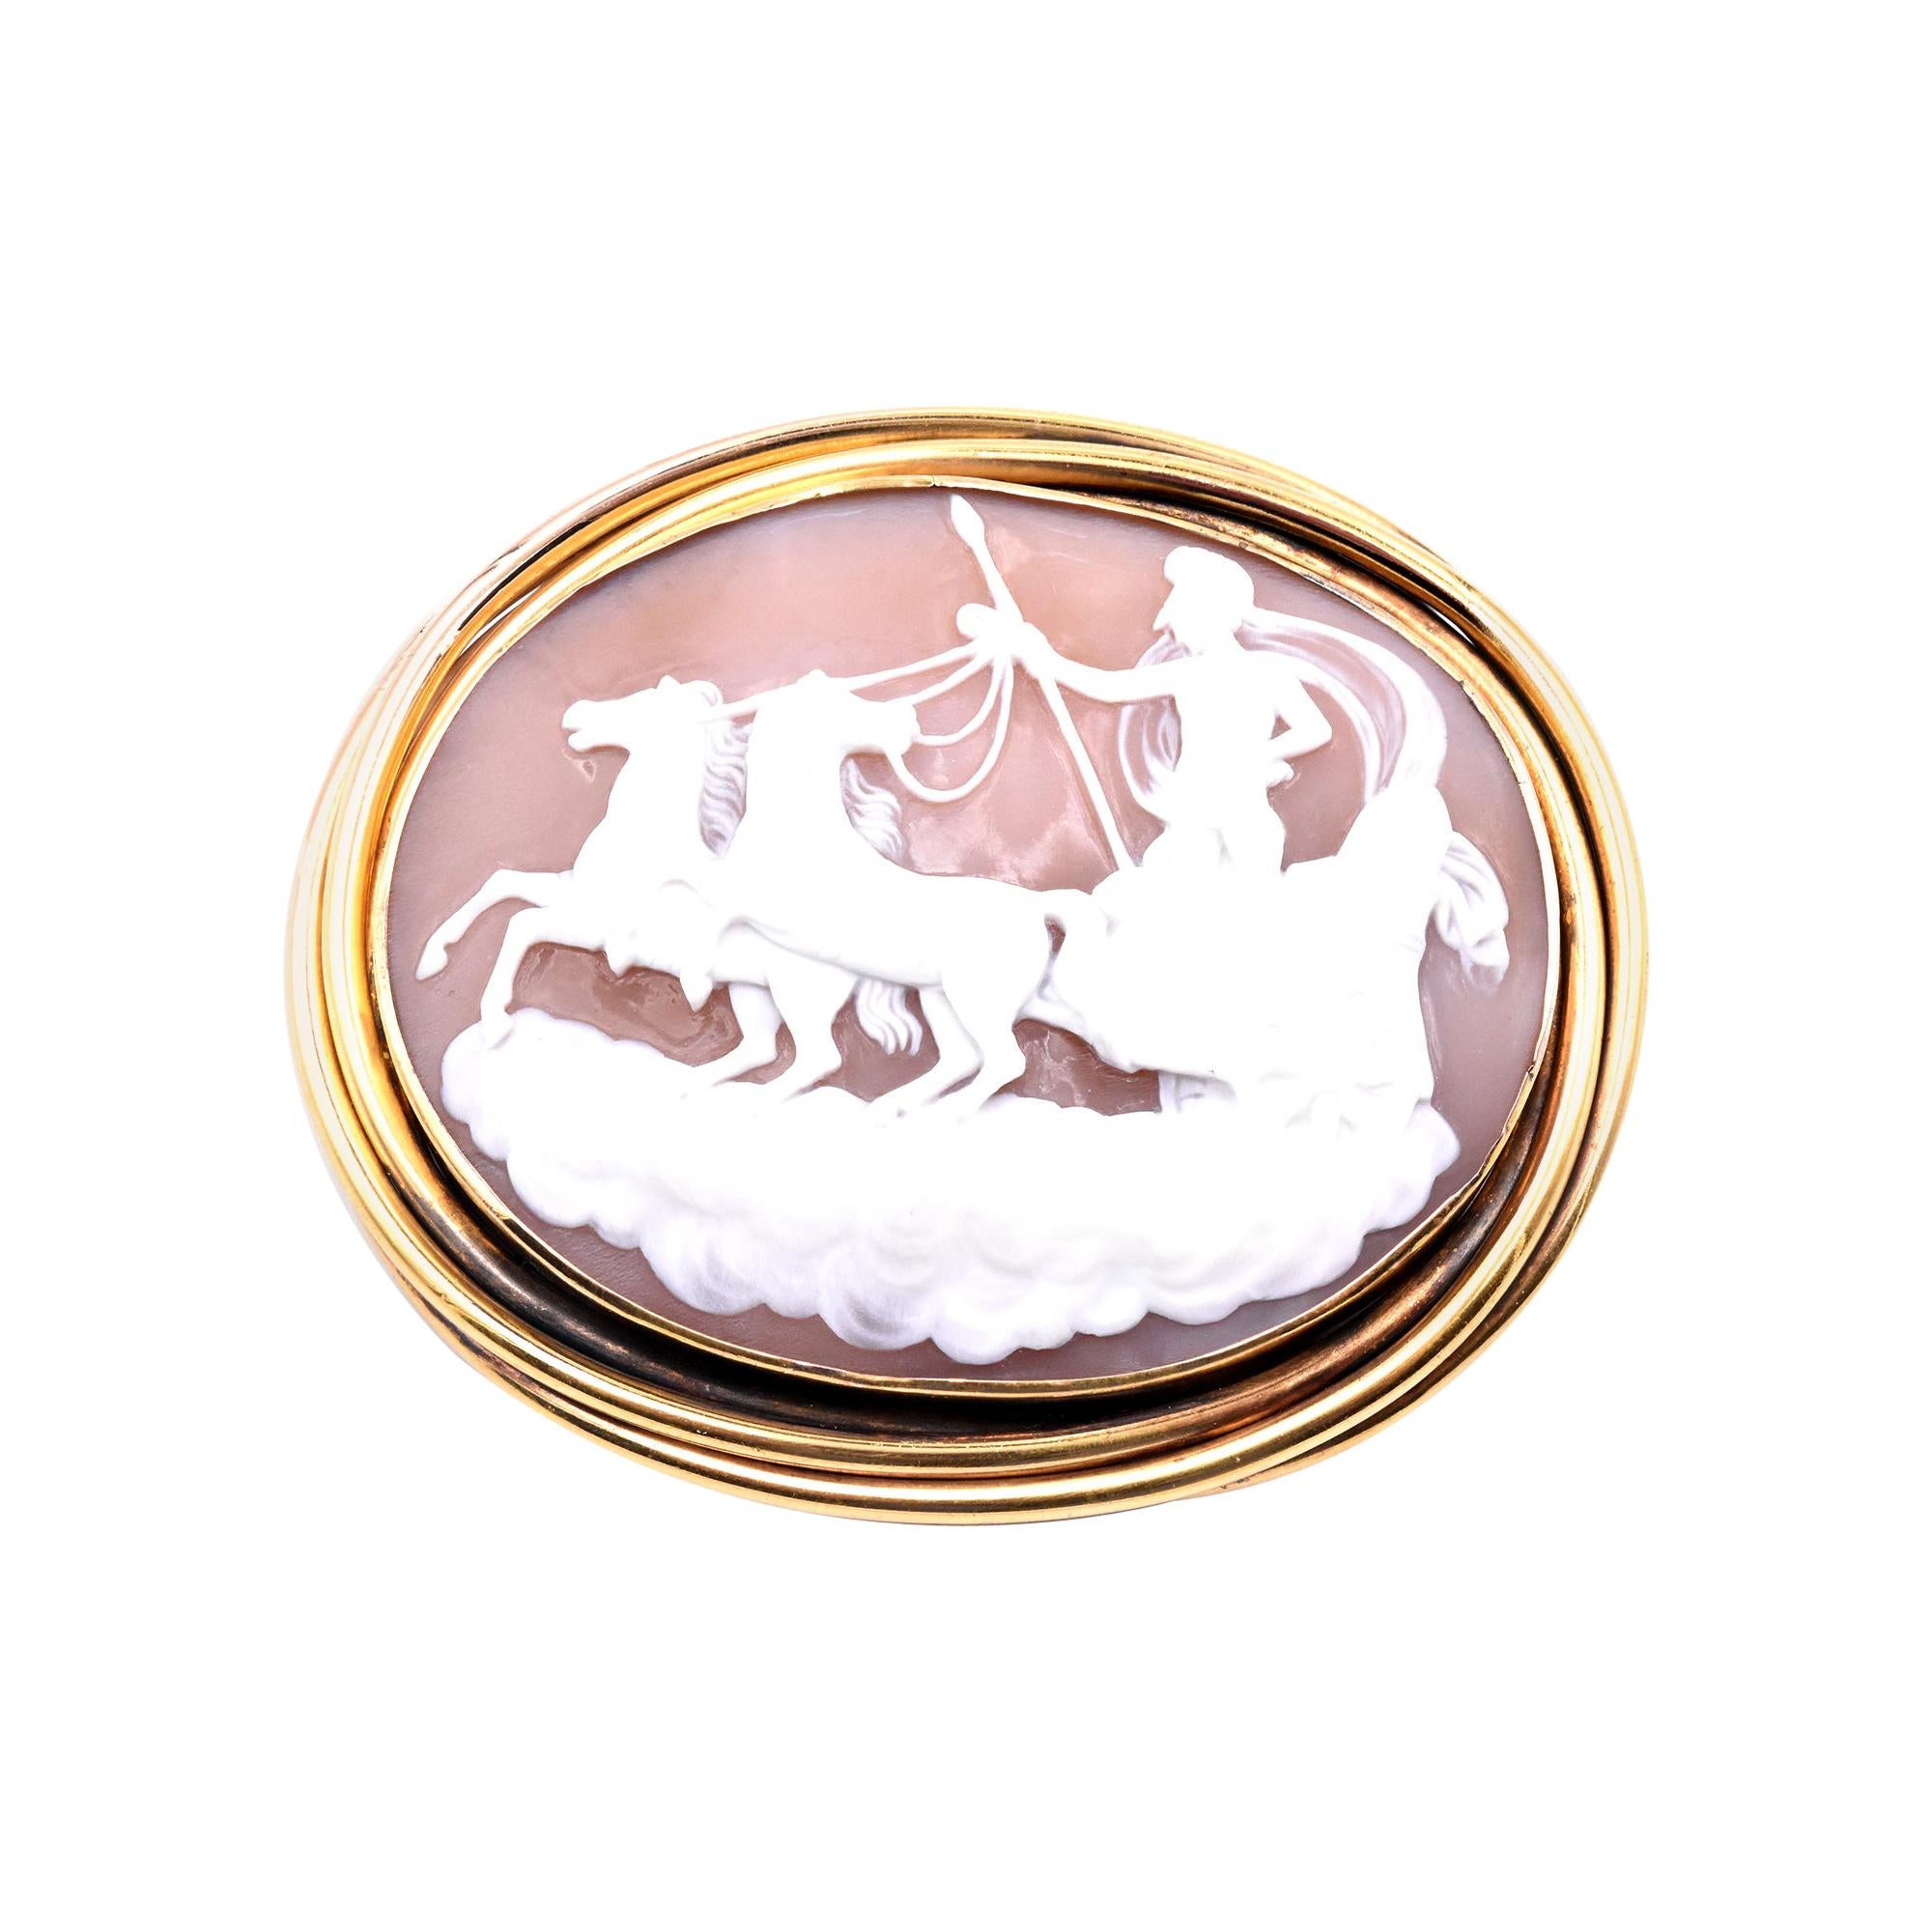 14/18 Karat Yellow Gold Chariot Cameo Pin For Sale